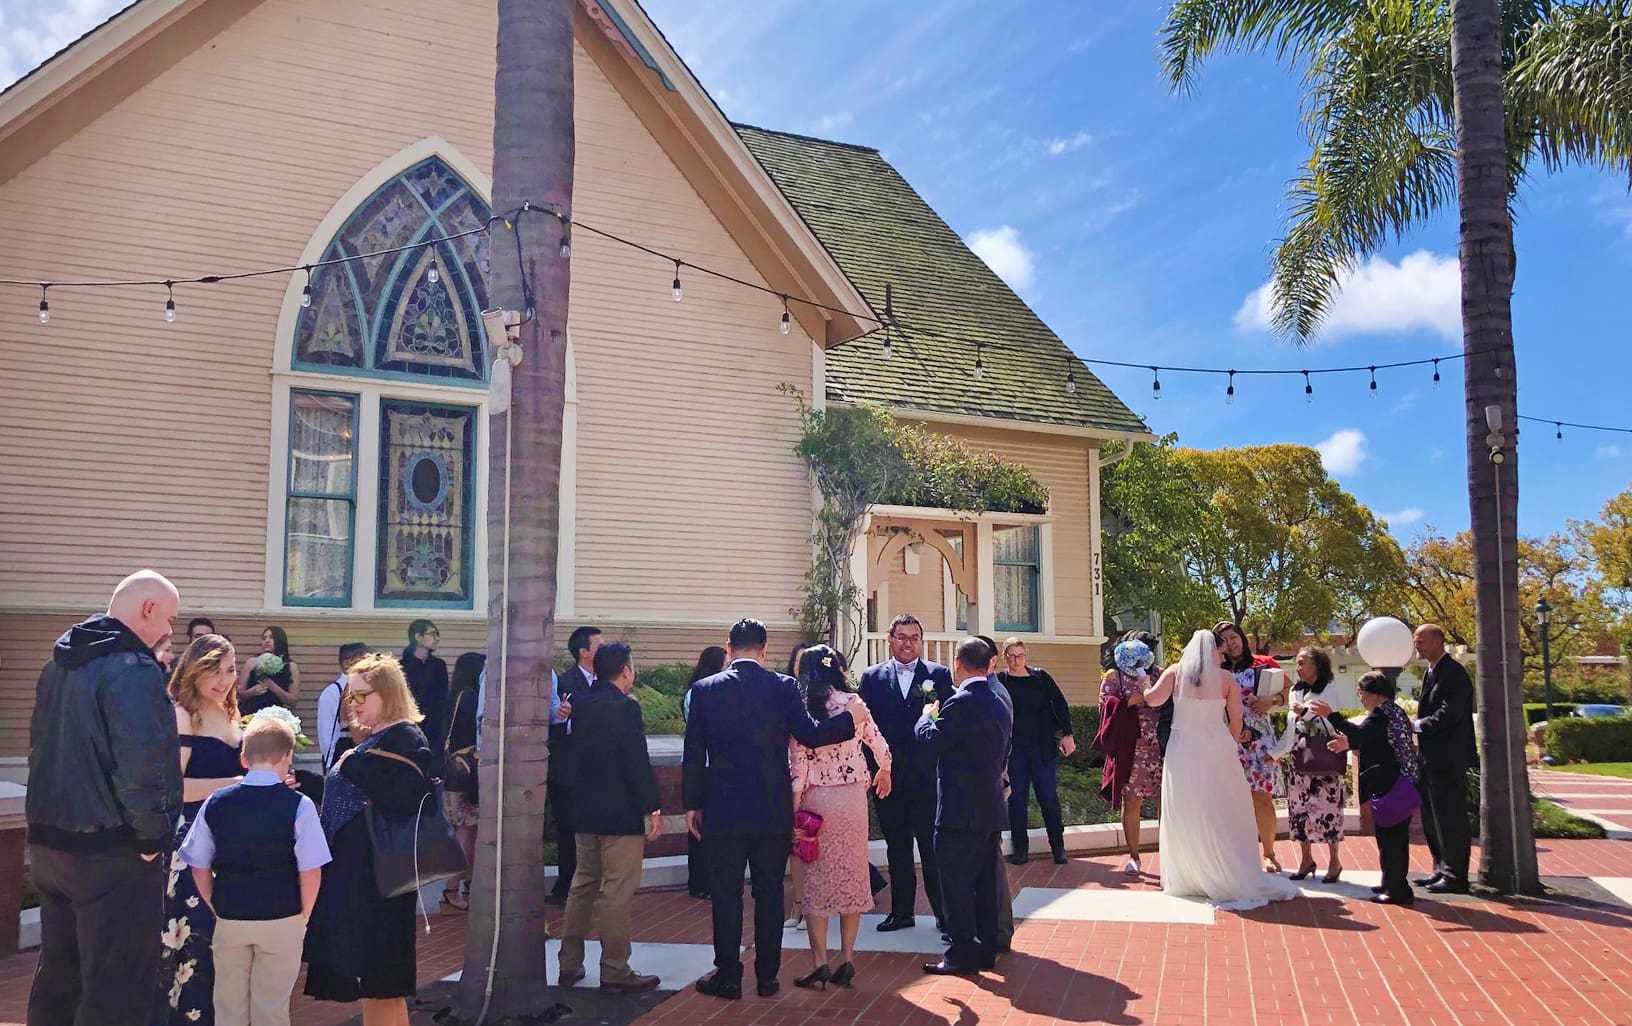 Wedding guests gather outside a quaint chapel in Heritage Square, Oxnard, under a clear sky, with a bride and groom in the center, surrounded by palm trees.